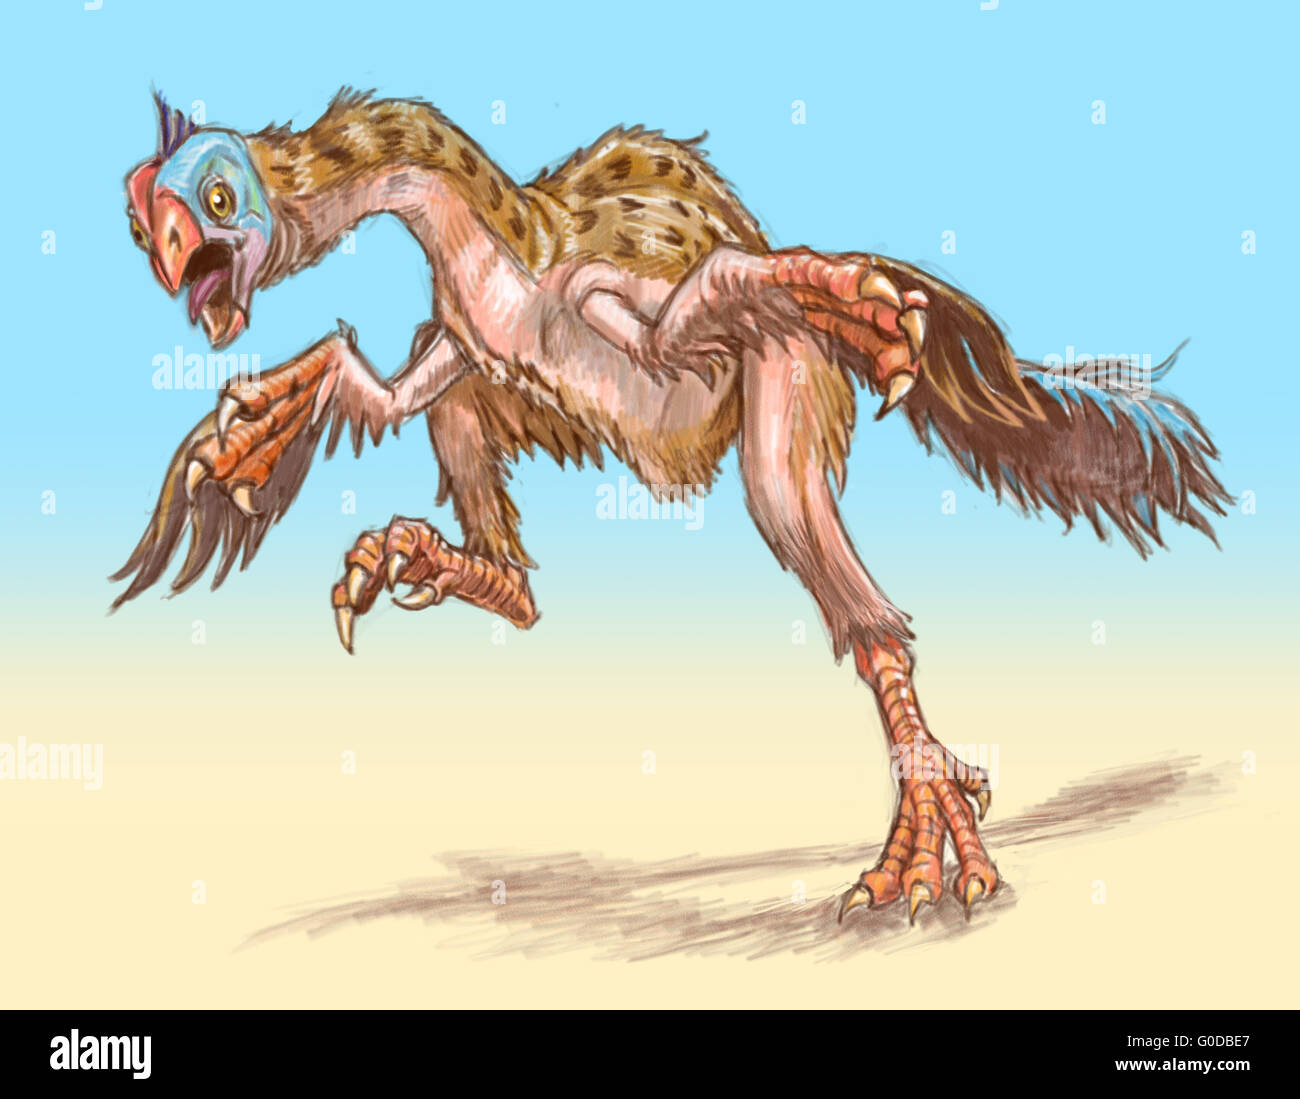 The original angry bird. An agitated gigantoraptor dinosaur runs toward the viewer, flapping its wings or arms. Stock Photo